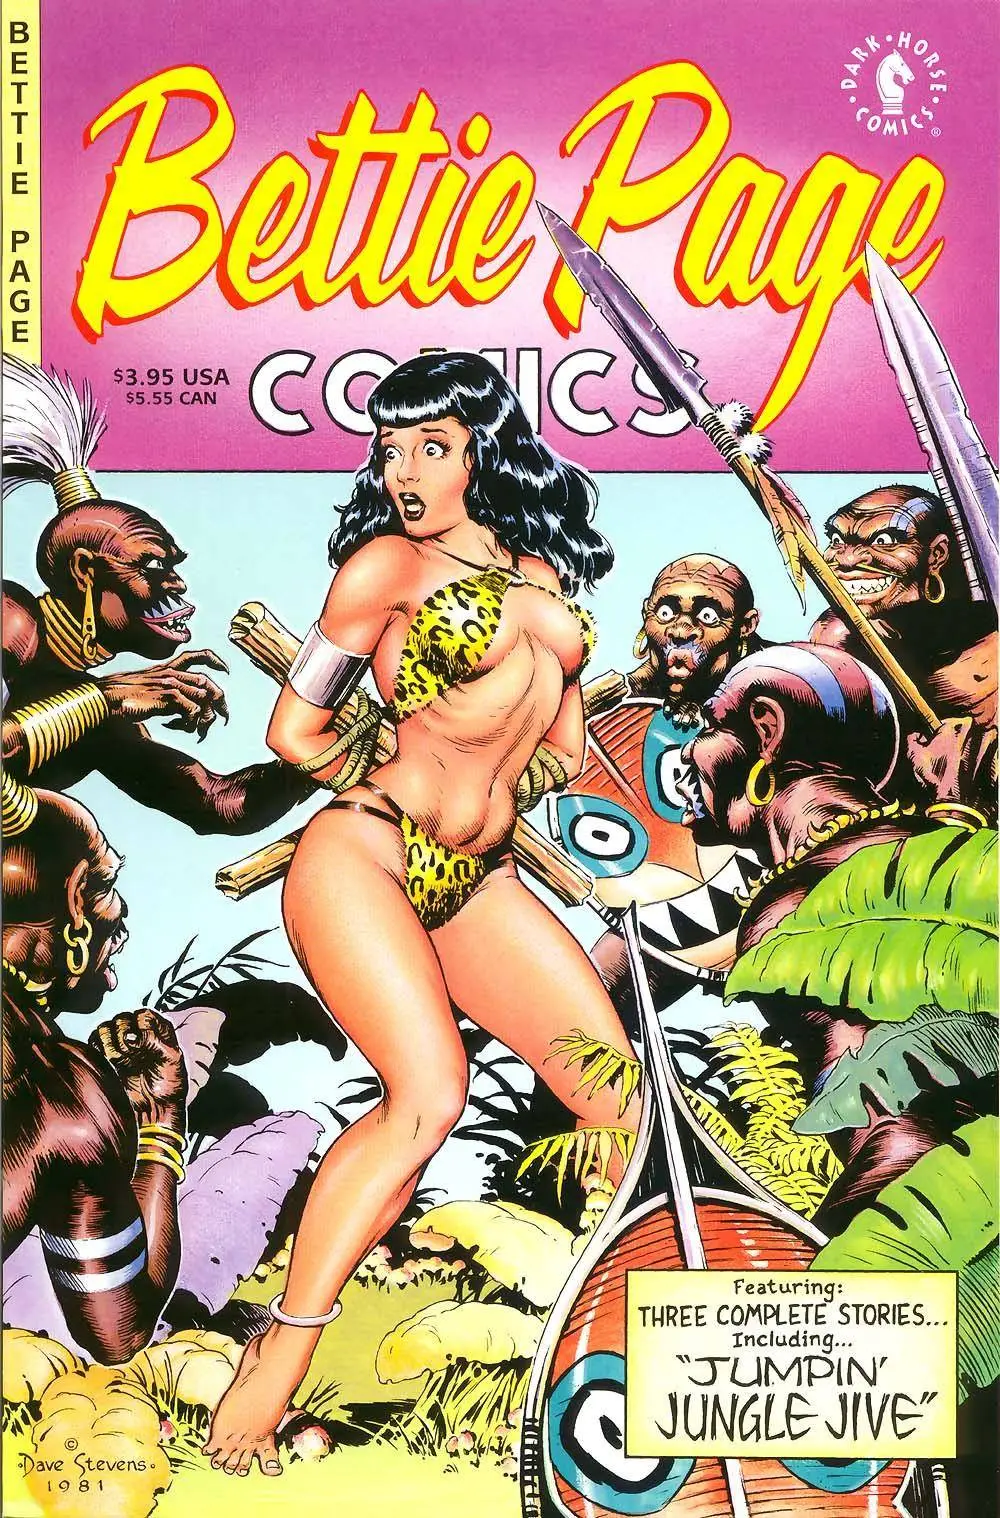 For proutoo - found these only - Bettie Page - Jumpin Jungle Jive cbr